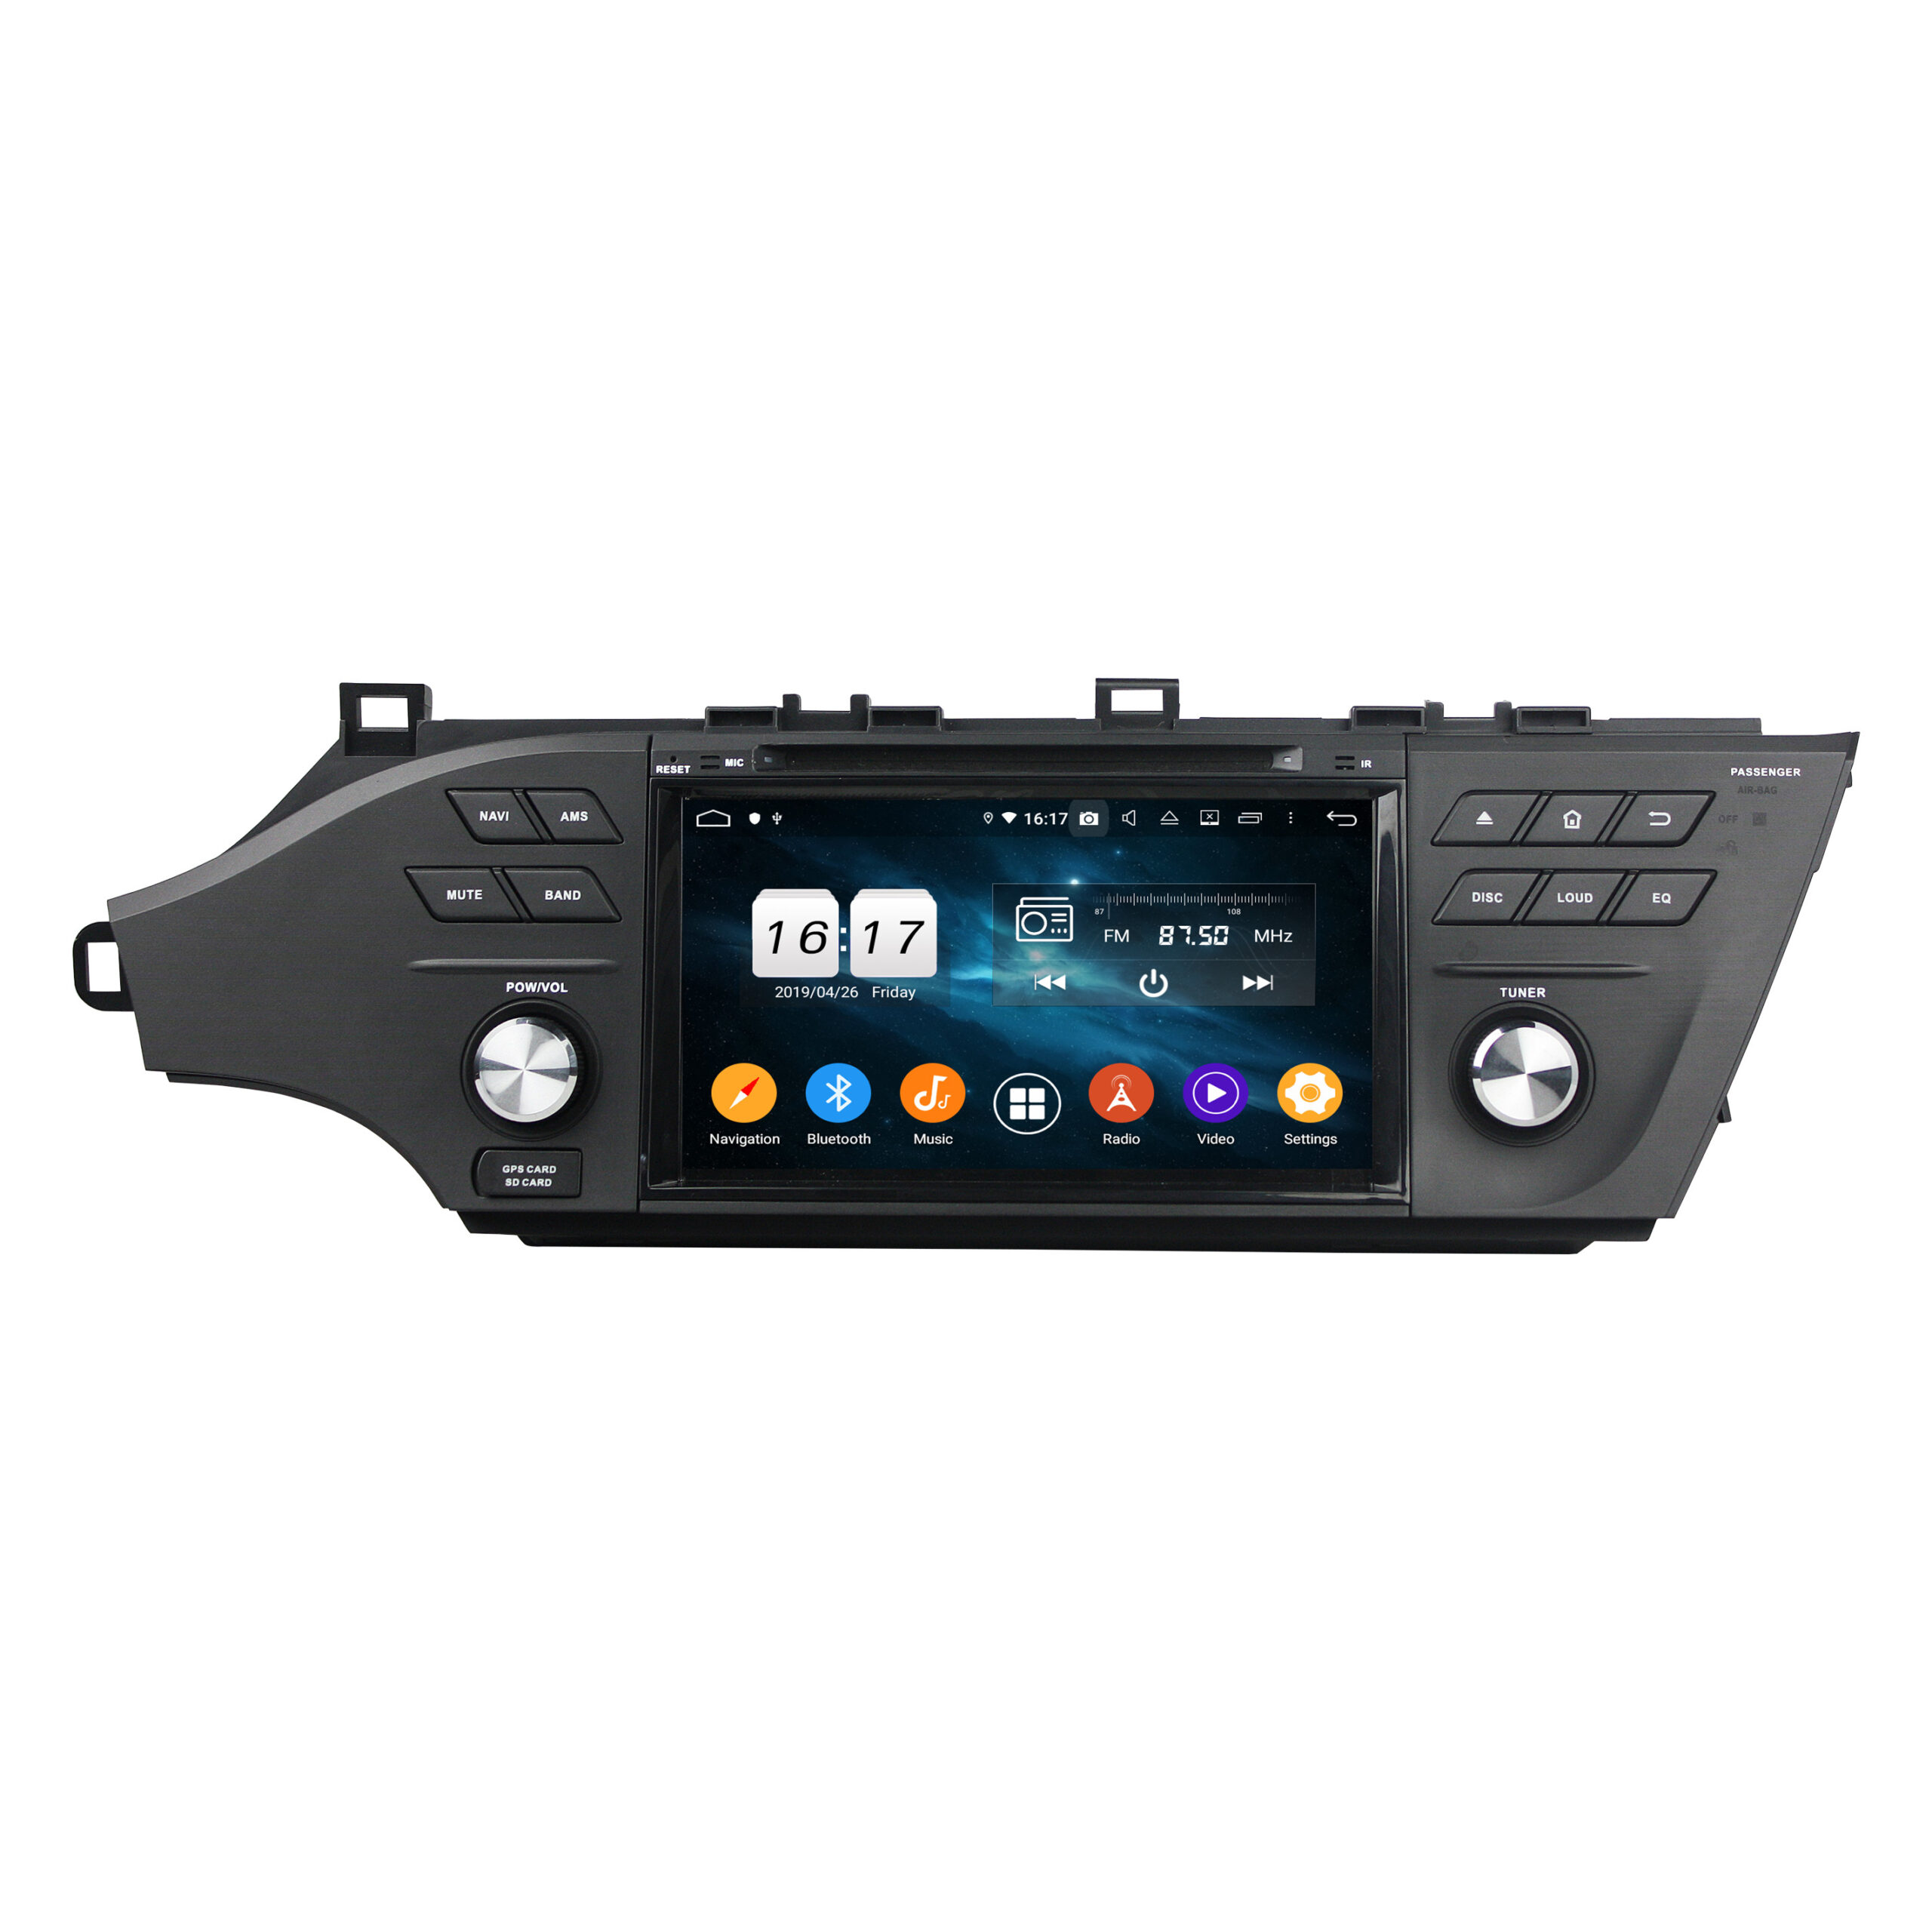 KD-8408 KLYDE android car video cheap bluetooth car stereo for Toyota Avalon